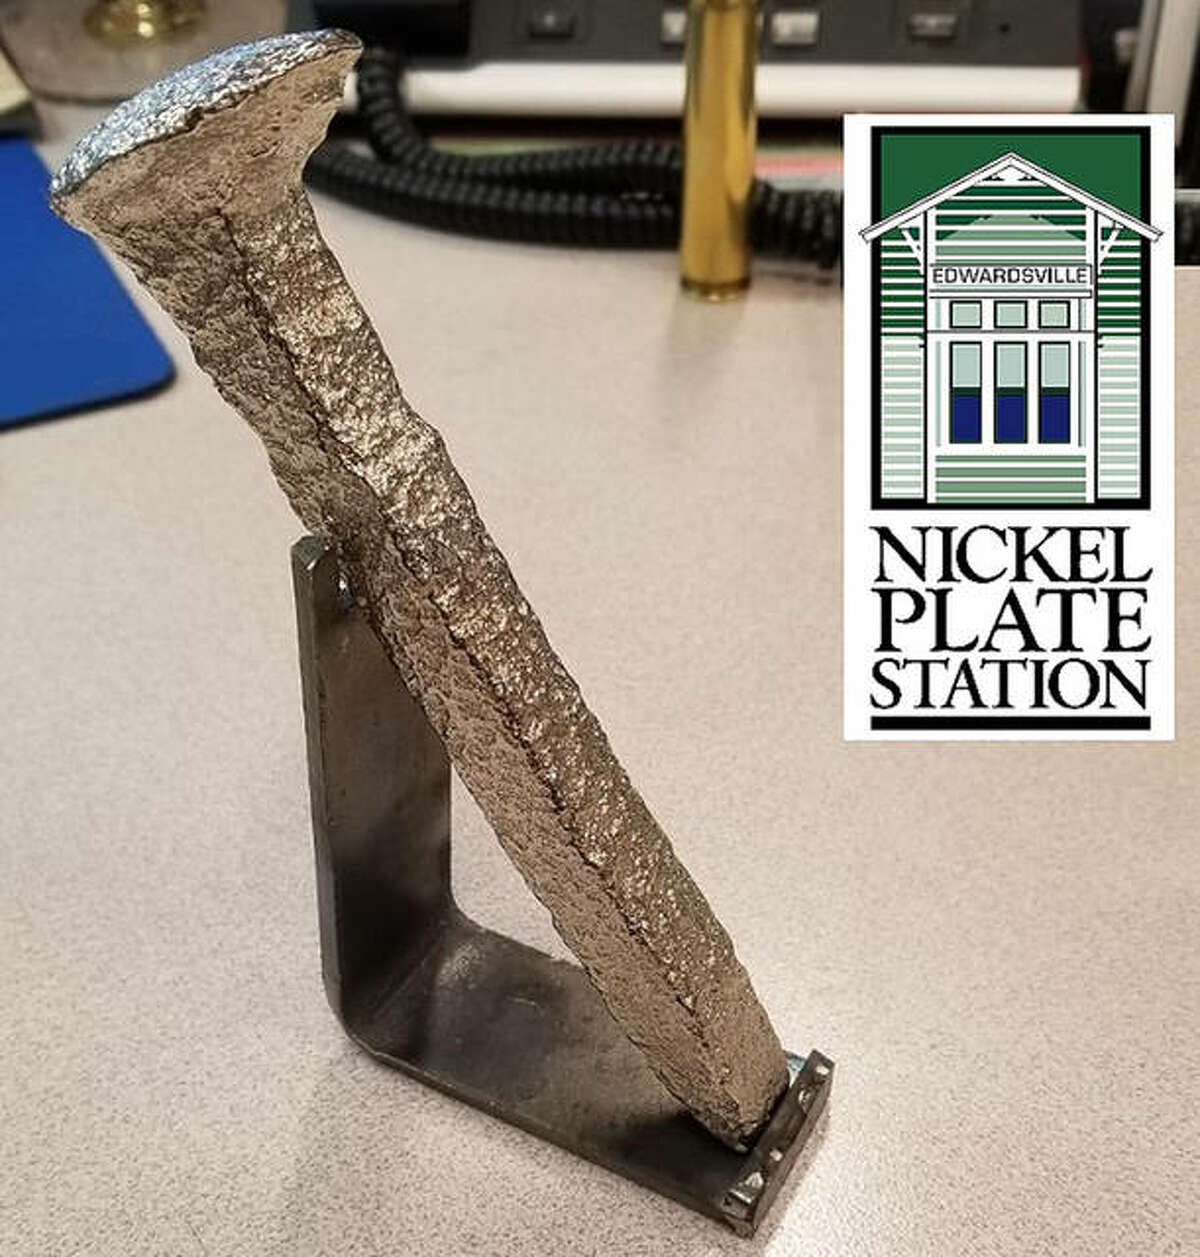 Lewis and Clark Community College students fashioned these mounts for the nickel spikes that any donor who gives at least $100 receives in exchange for their contributions.